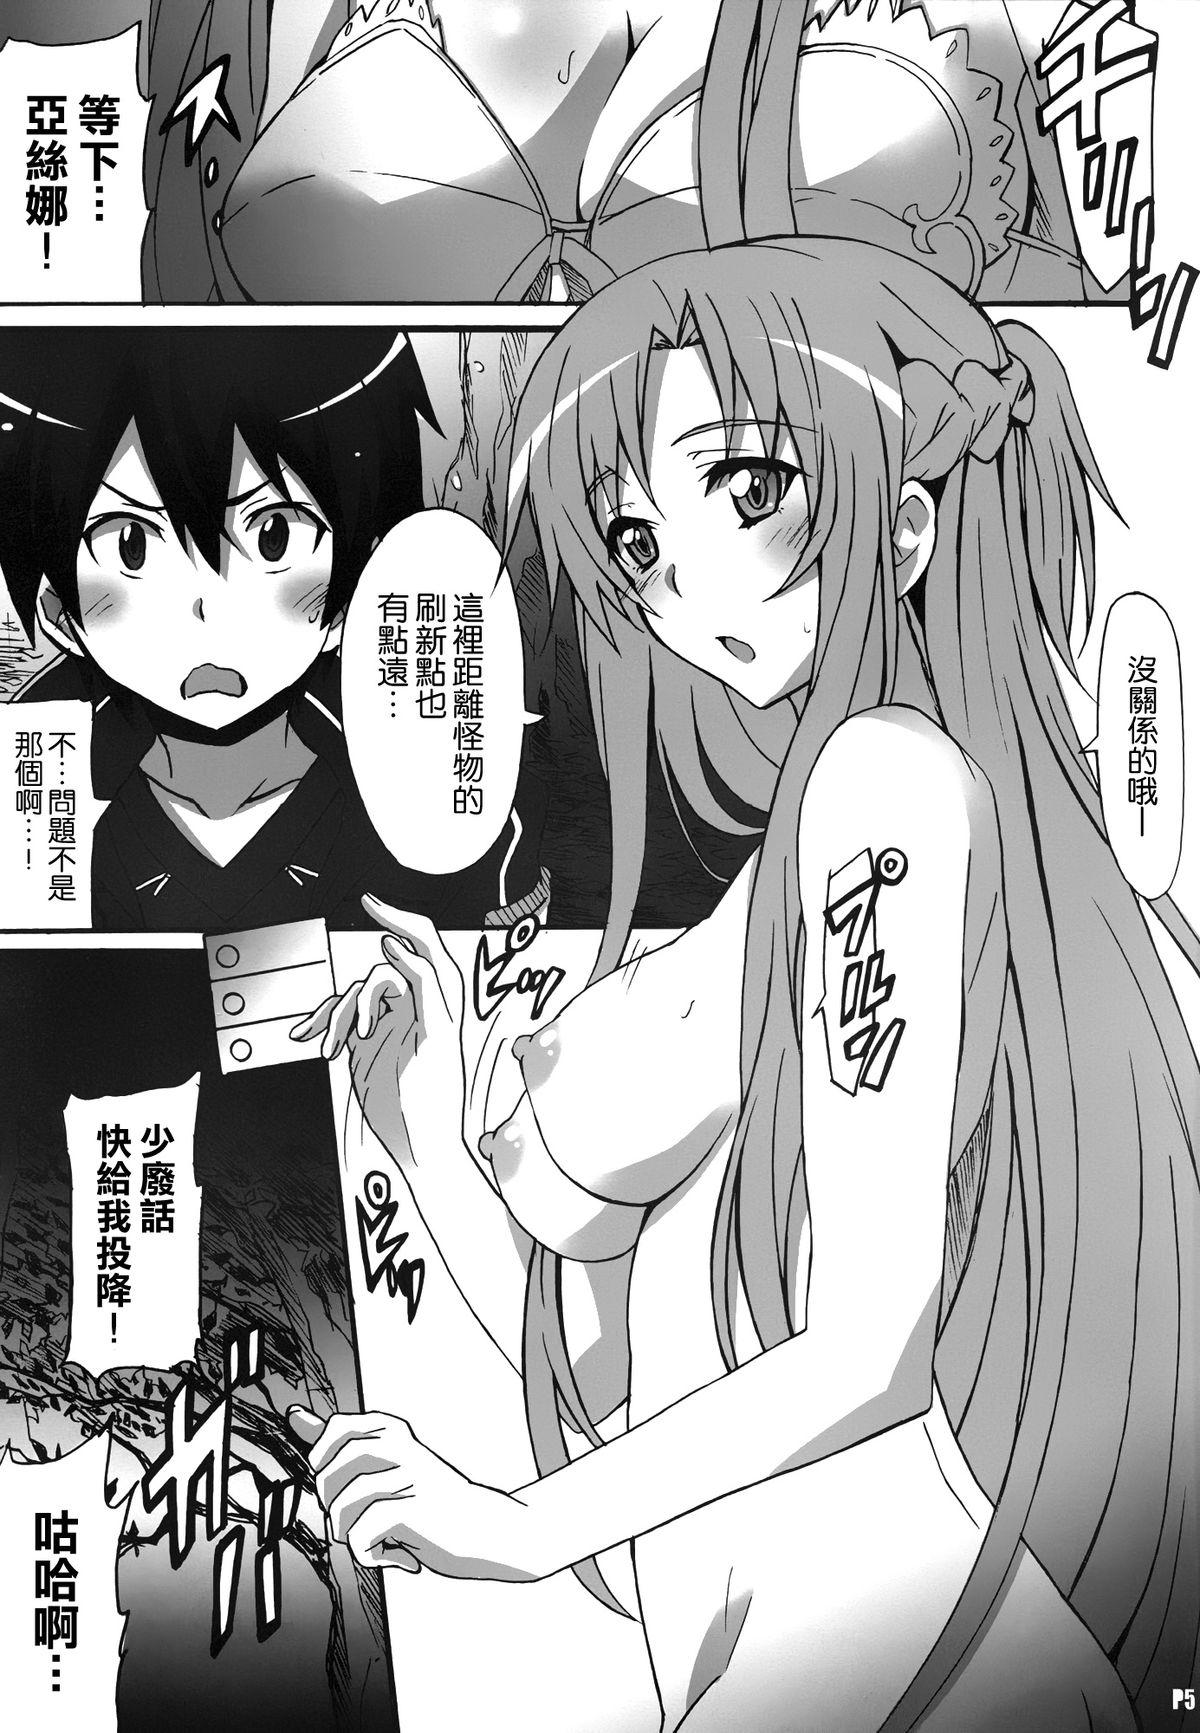 The Sword Art Online Hollow Sensual - Sword art online Softcore - Page 5